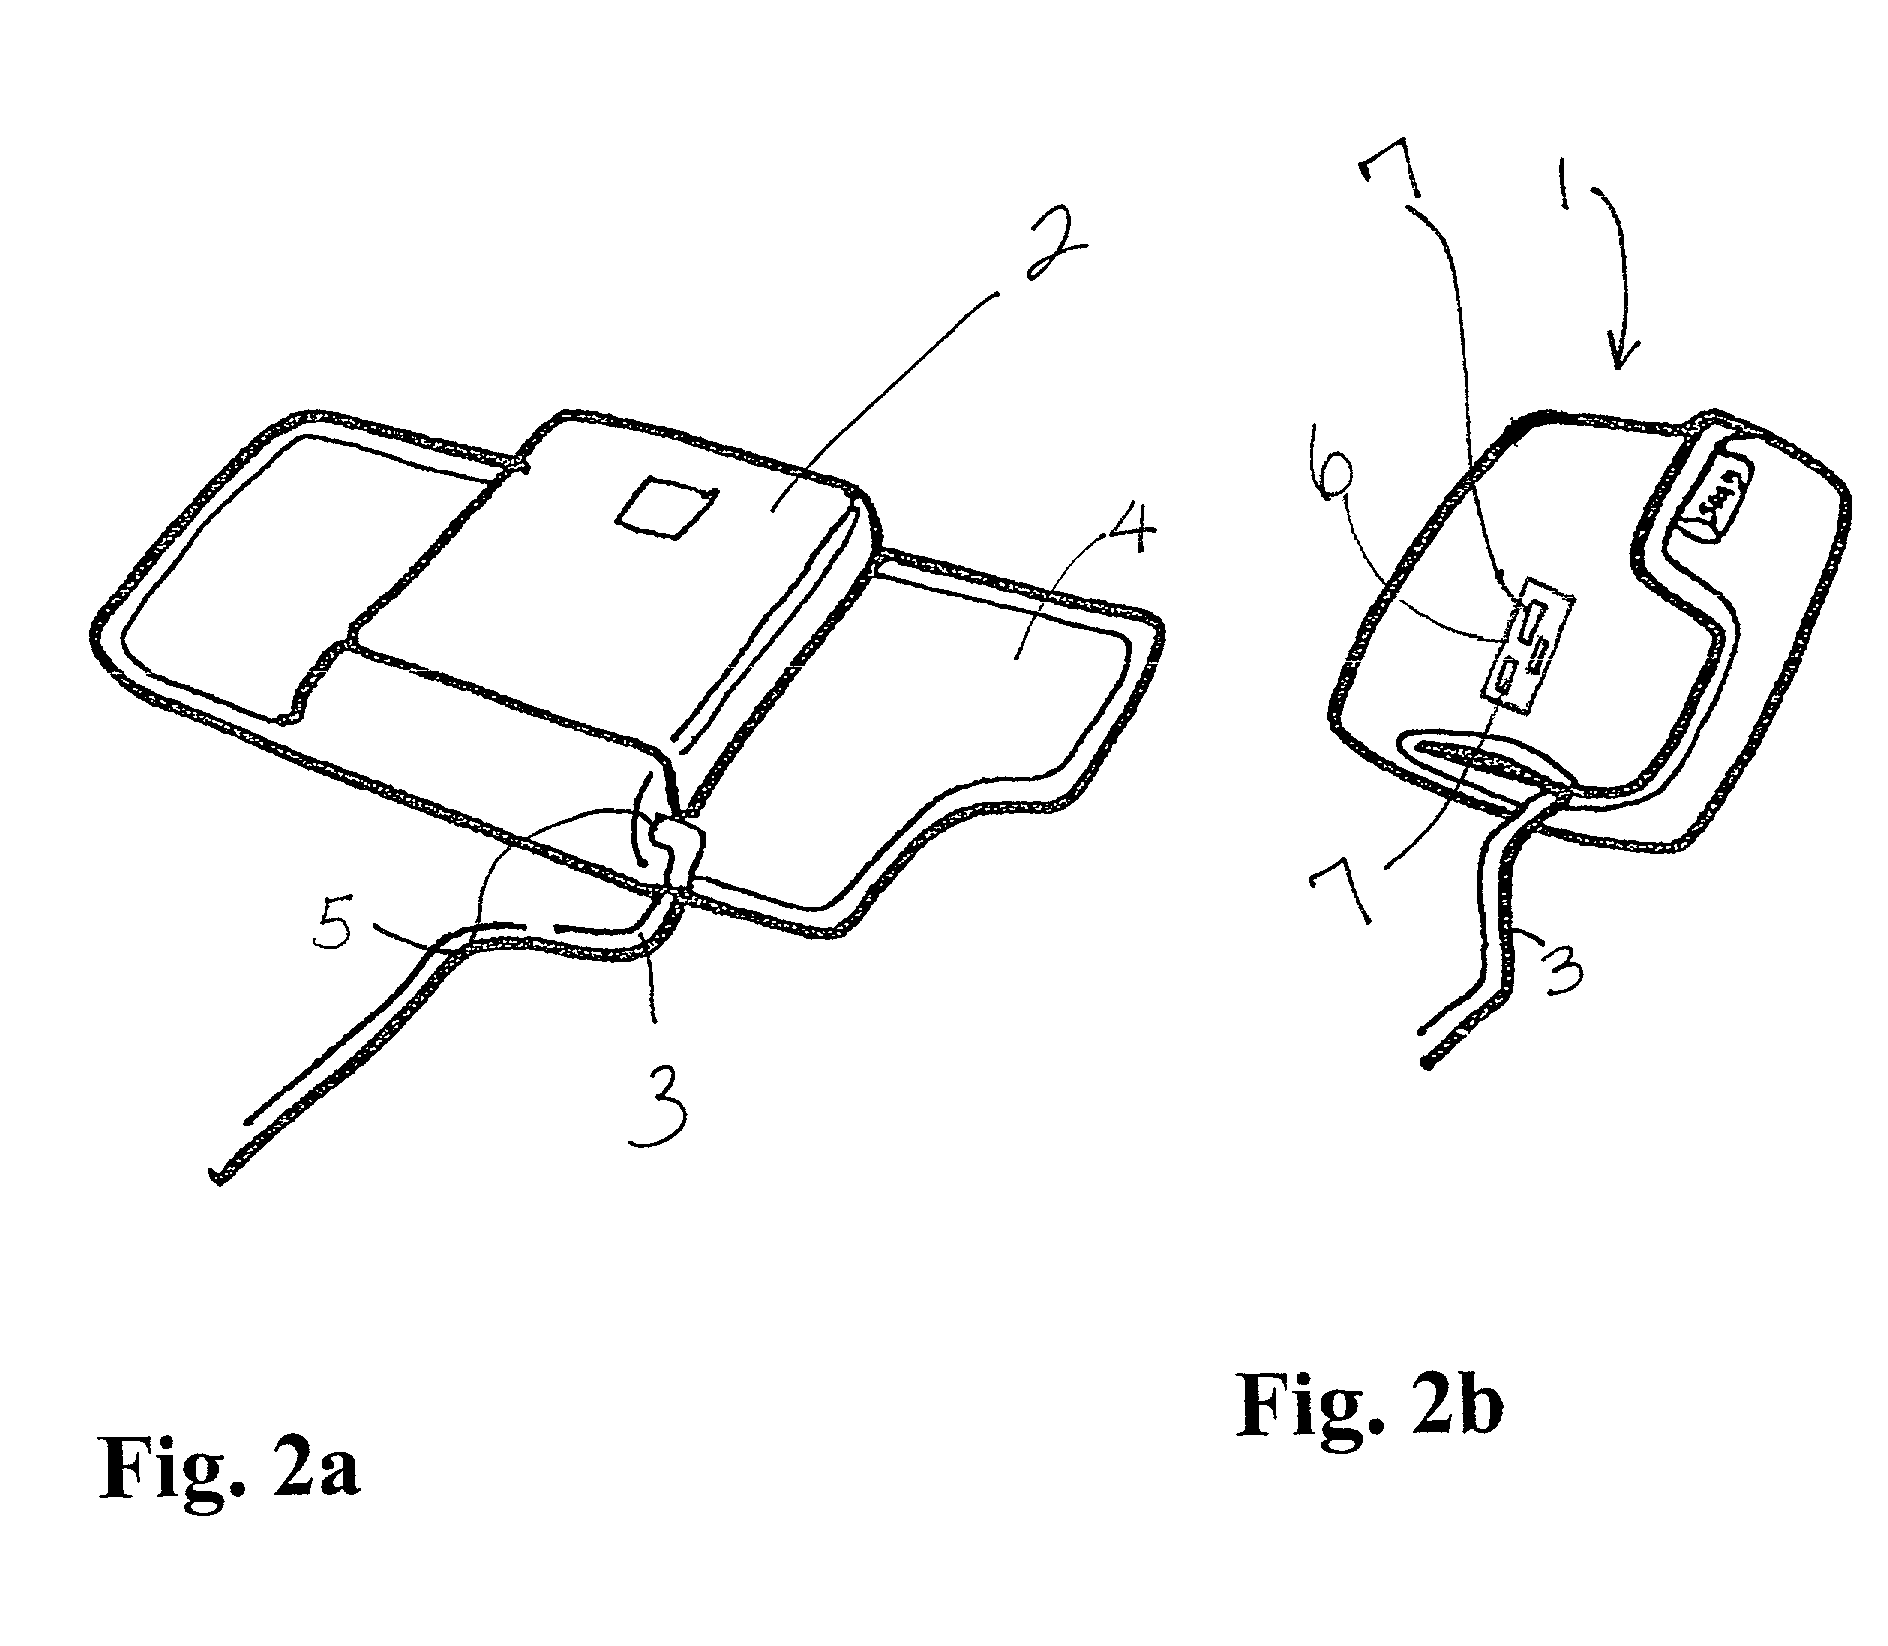 Carrying case for portable electronic devices